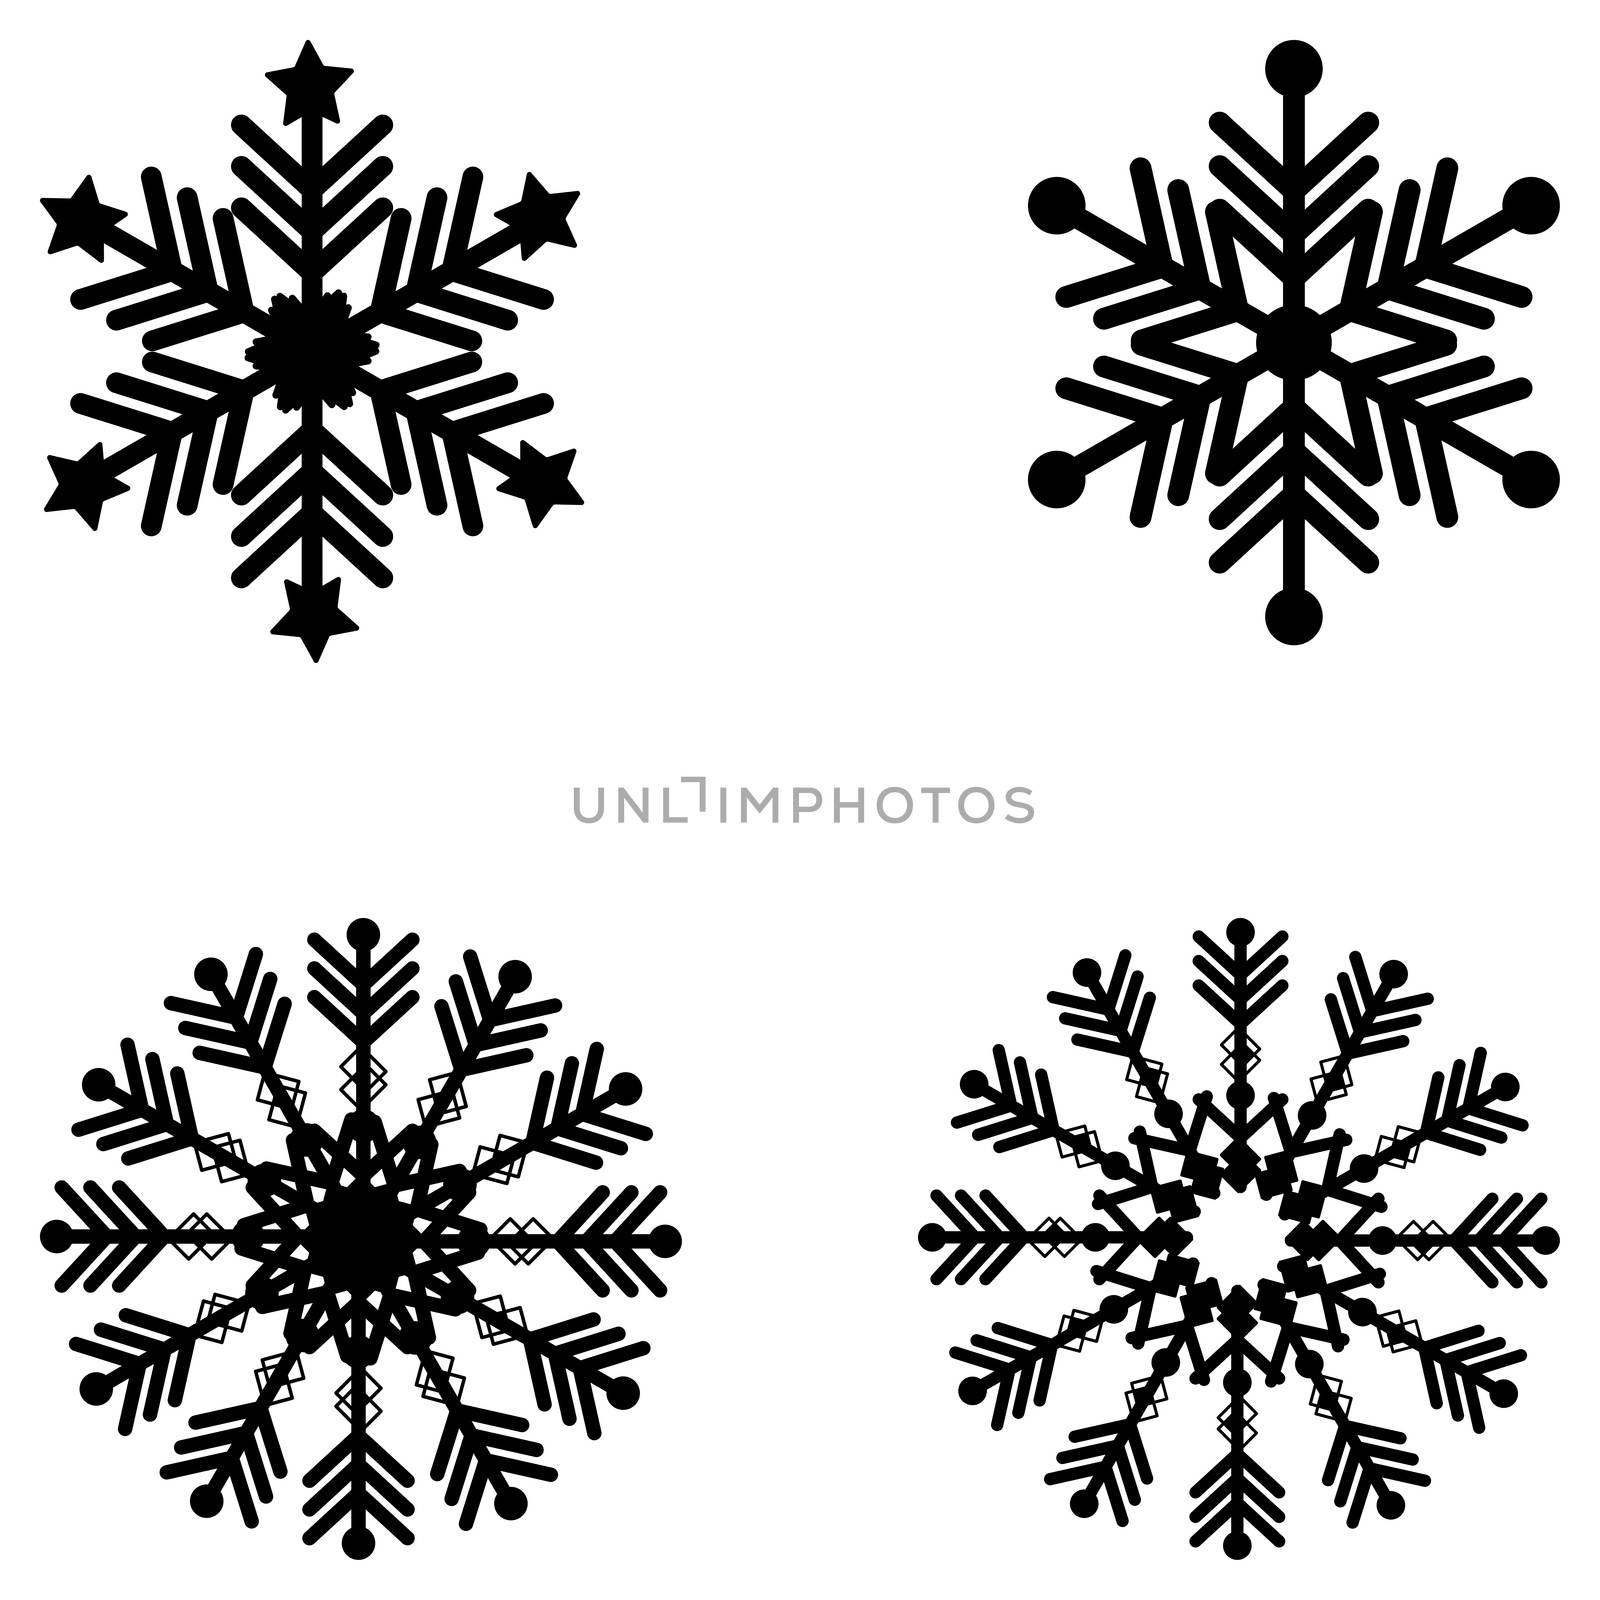 Paper cutout snowflakes isolated on white background. Winter christmas decoration. Black paper decoration template for scrapbooking, laser cutting, cut out printers, wood. Vector illustration.